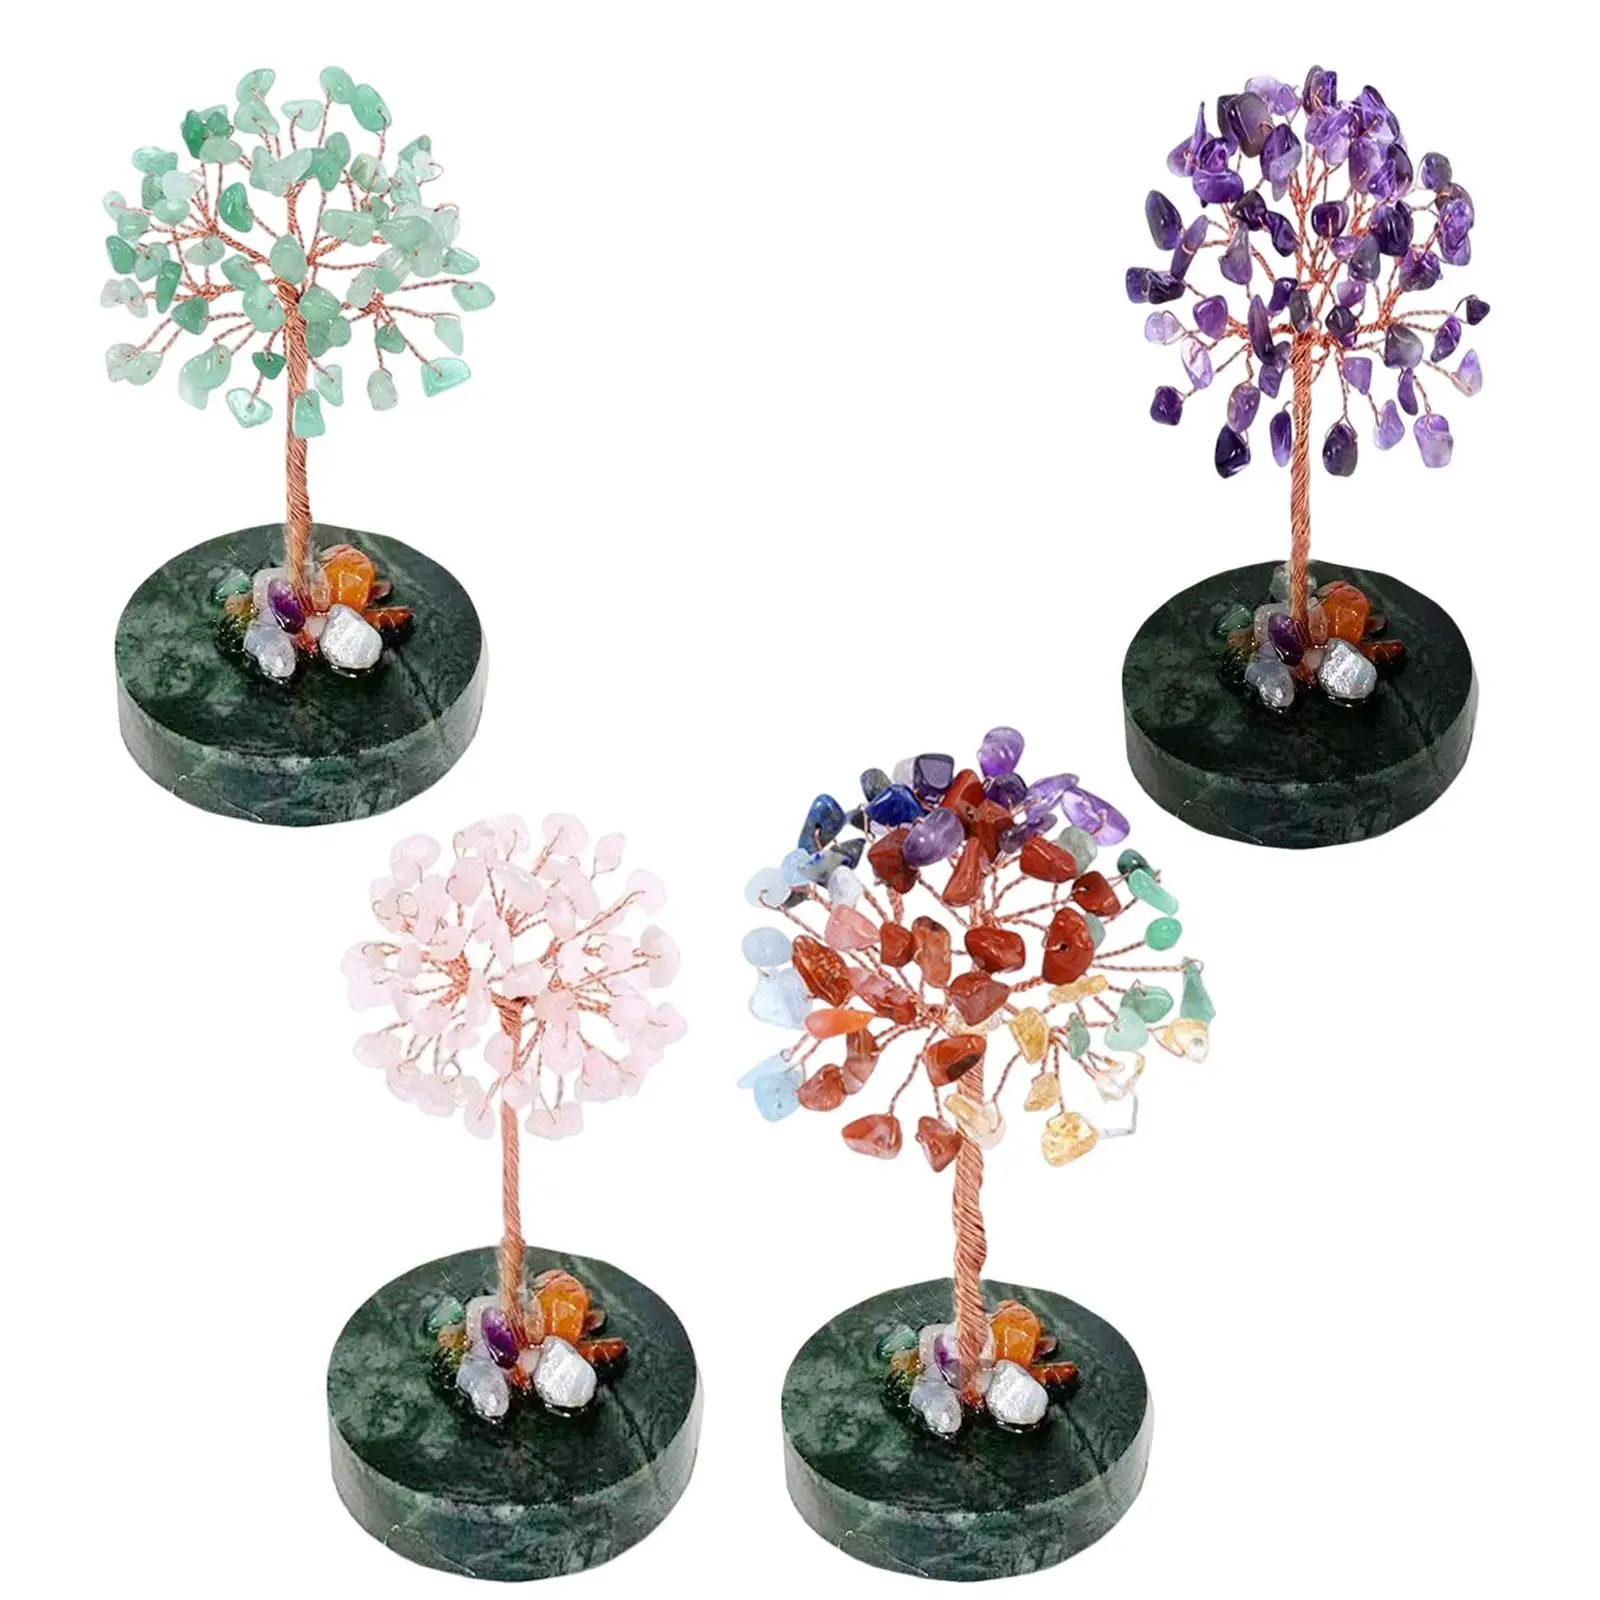 Tree Ornament Accessories Decoration Handmade Sculpture for Birthday Living Room